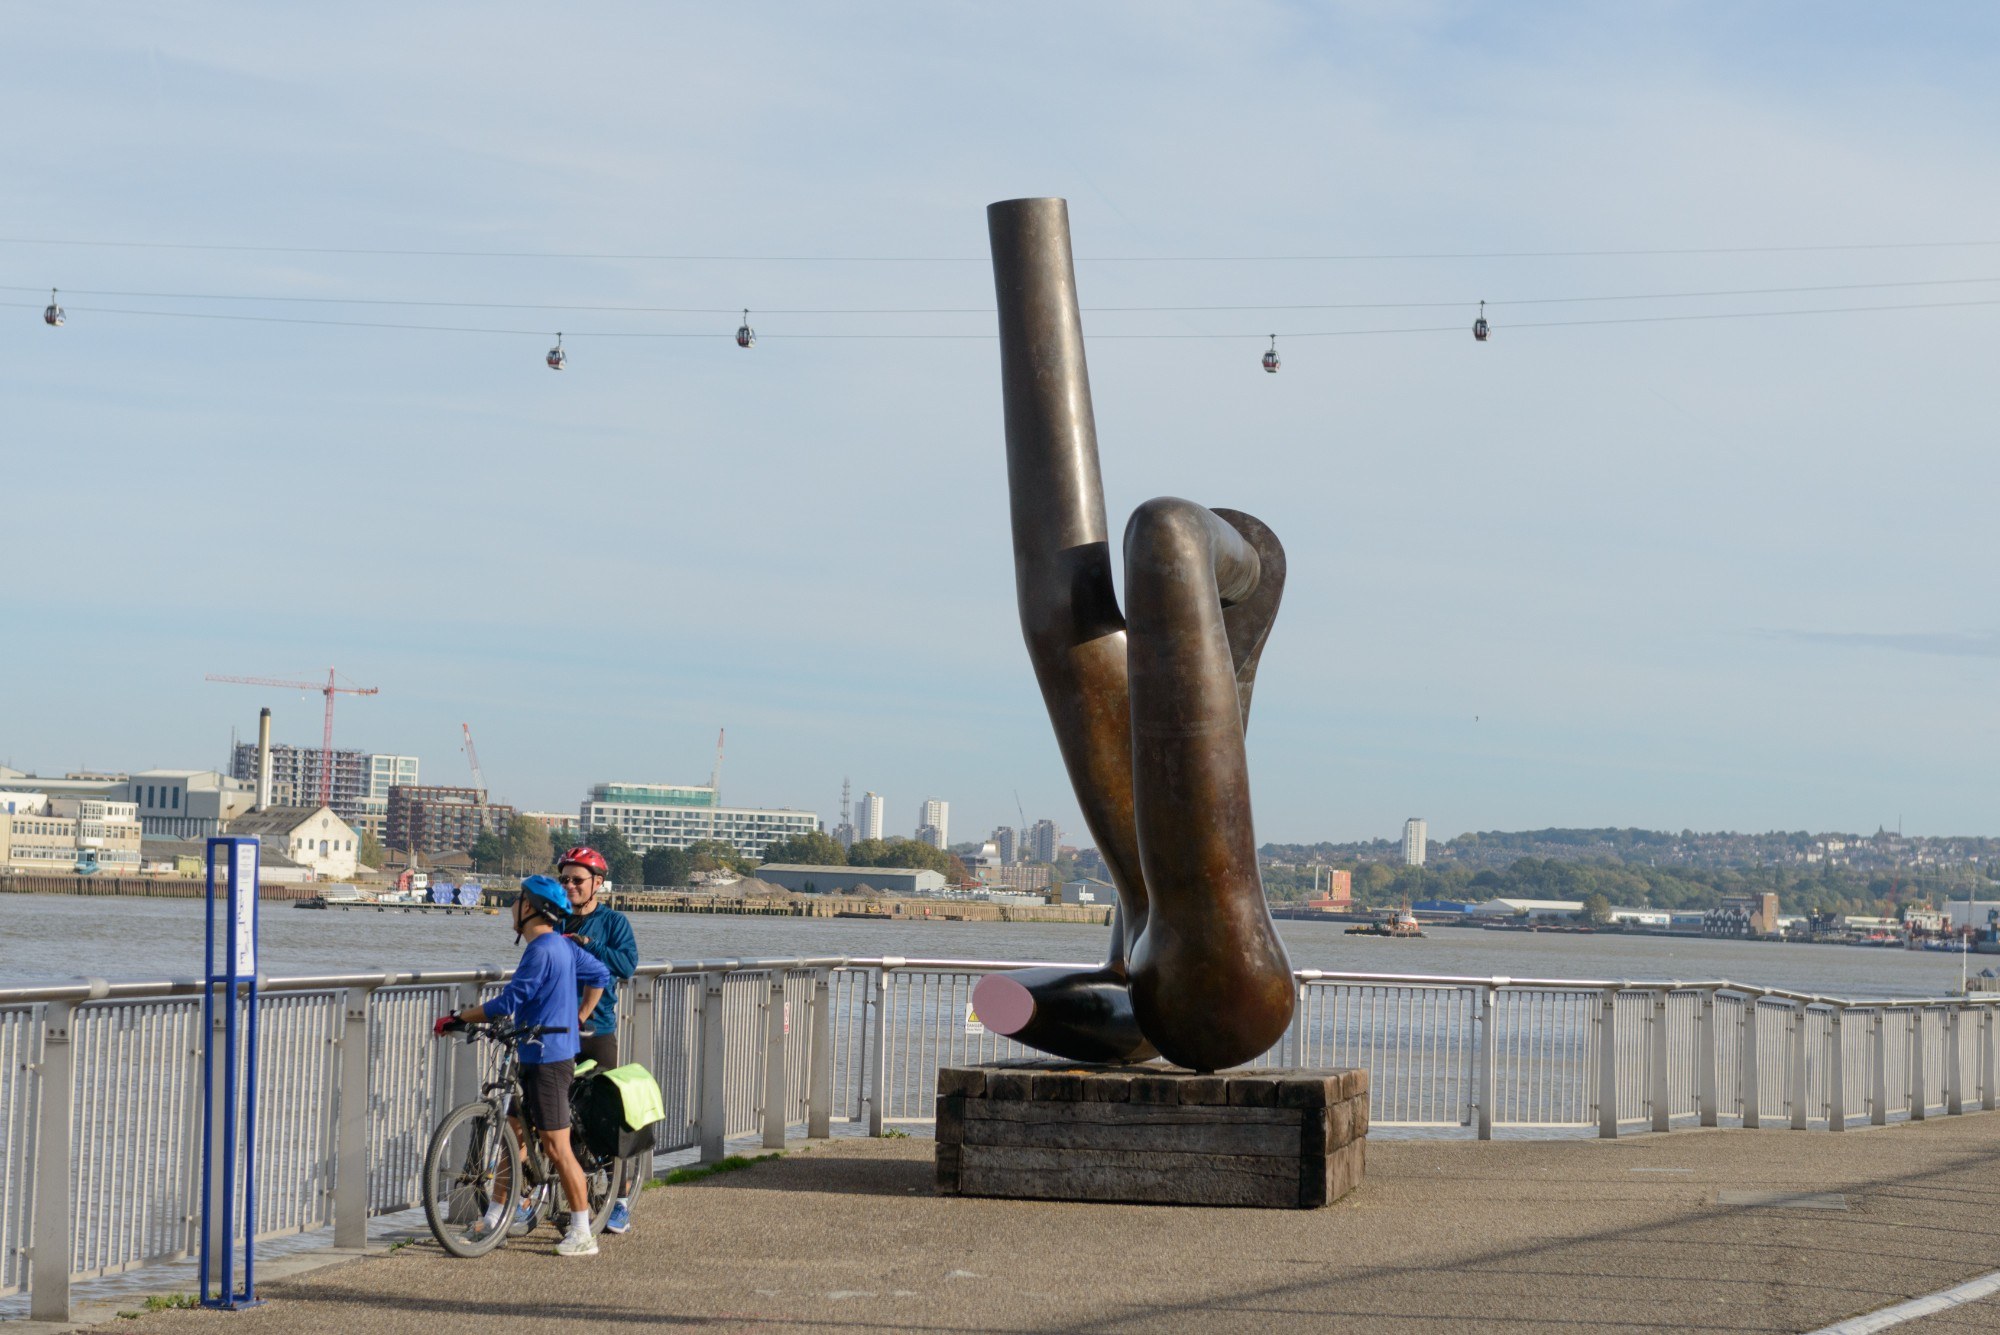 The Liberty Grip statue by Gary Hume